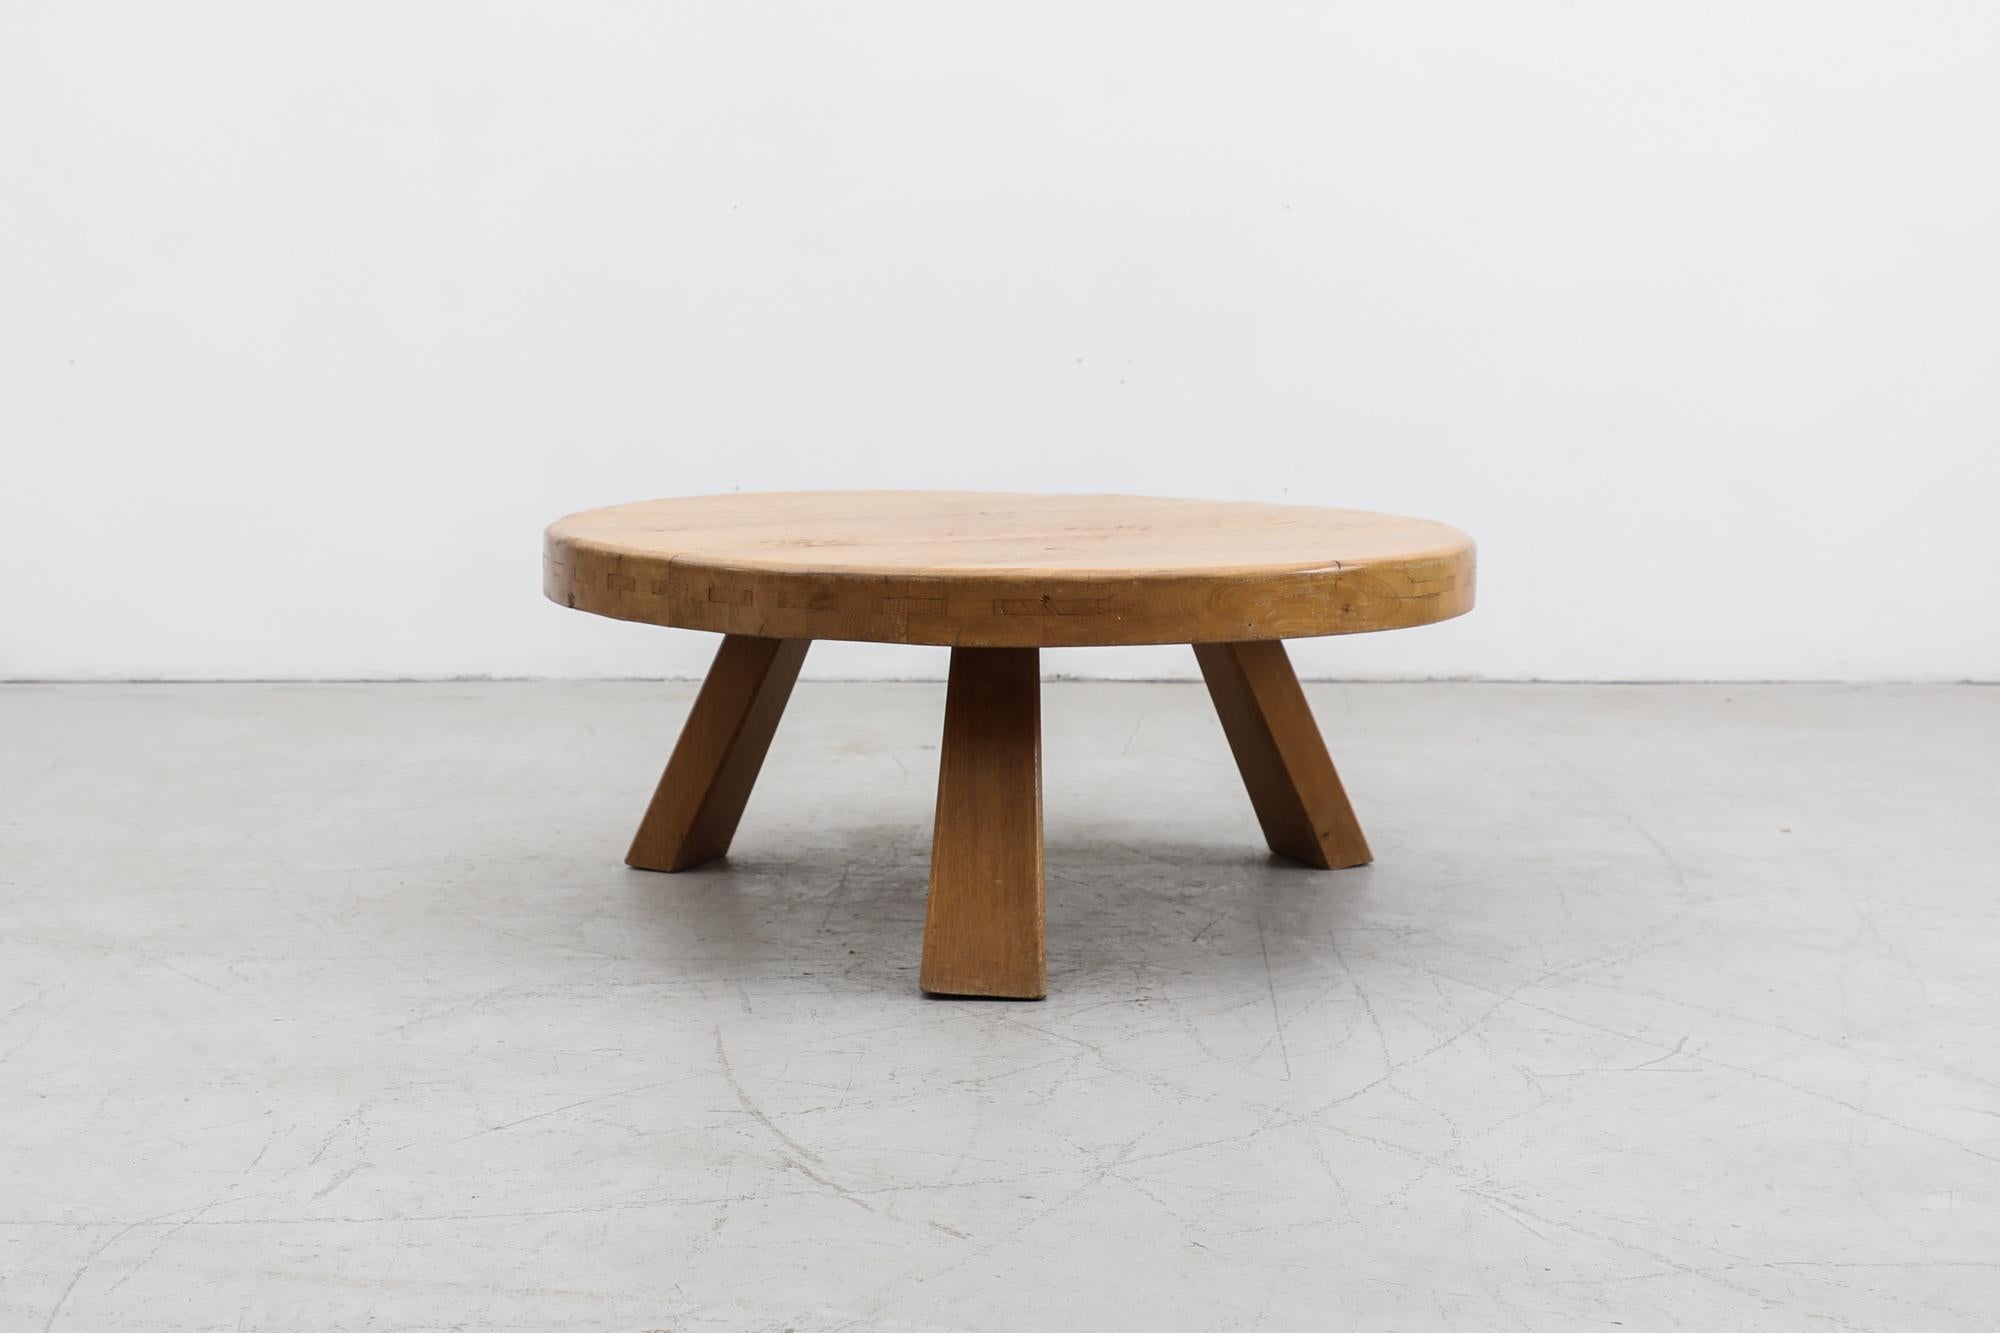 This Brutalist heavy round coffee table is made from solid oak and has three sturdy square legs. It has been lightly refinished. In otherwise original condition with visible wear and patina consistent with its age and use. Other similar tables